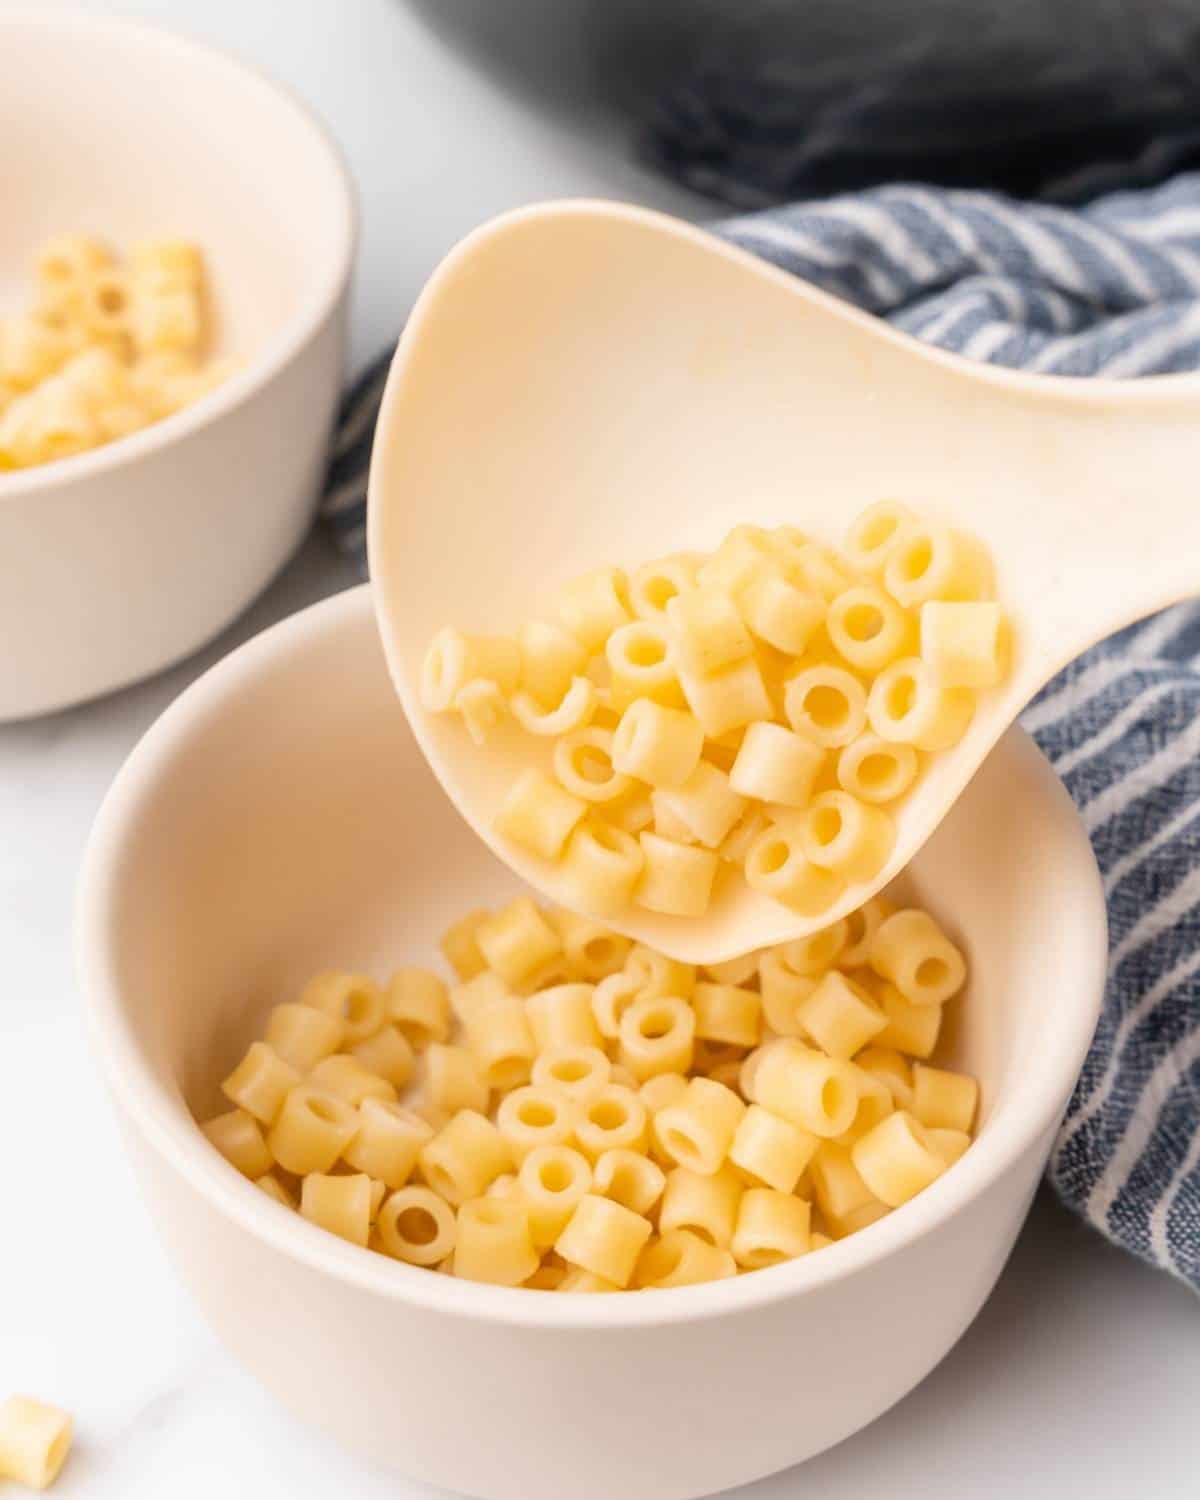 pasta in a bowl